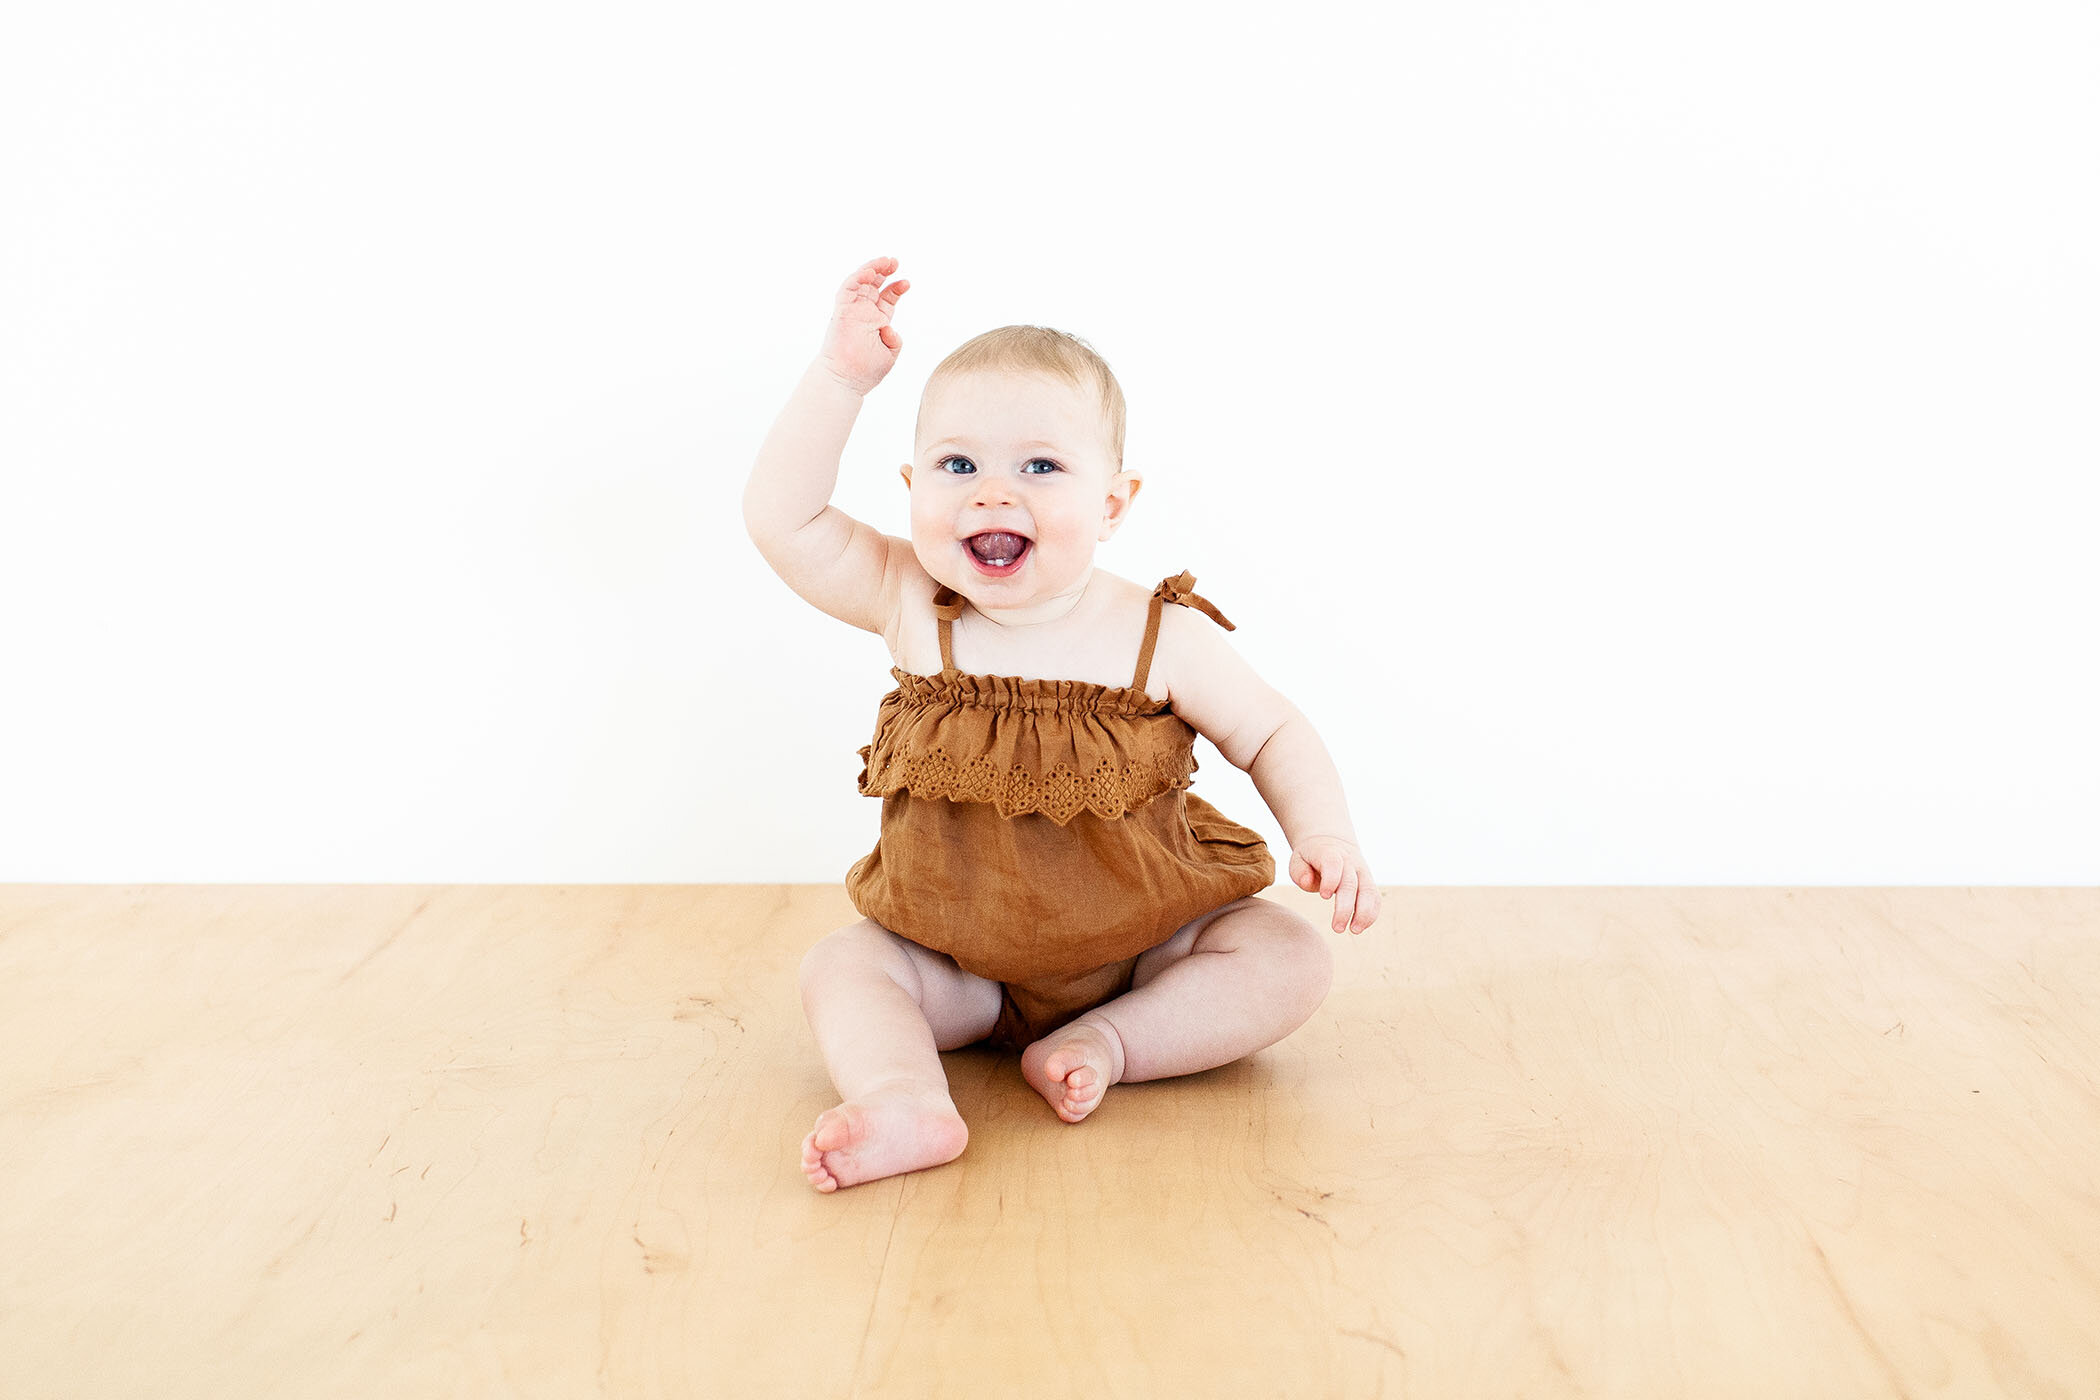 fletcher-and-co-tucson-portrait-studio-session-with-baby-girl_rothschild 023.jpg